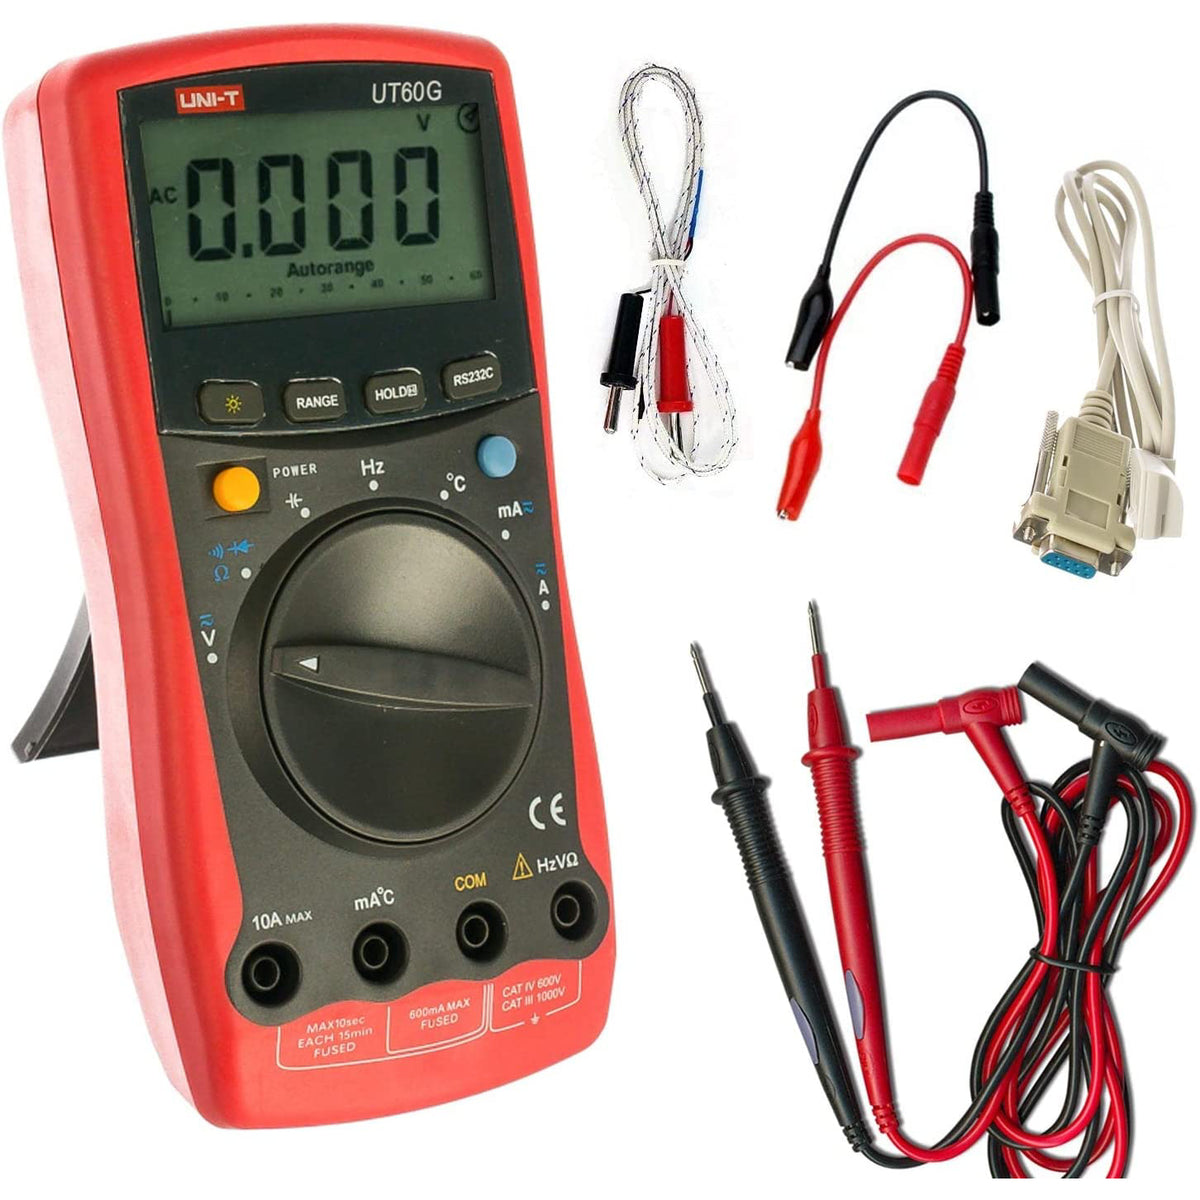 Uni-T UT60G Auto Ranging AC/DC Digital Multimeter with Computer RS232 –  Kaito Electronic Inc